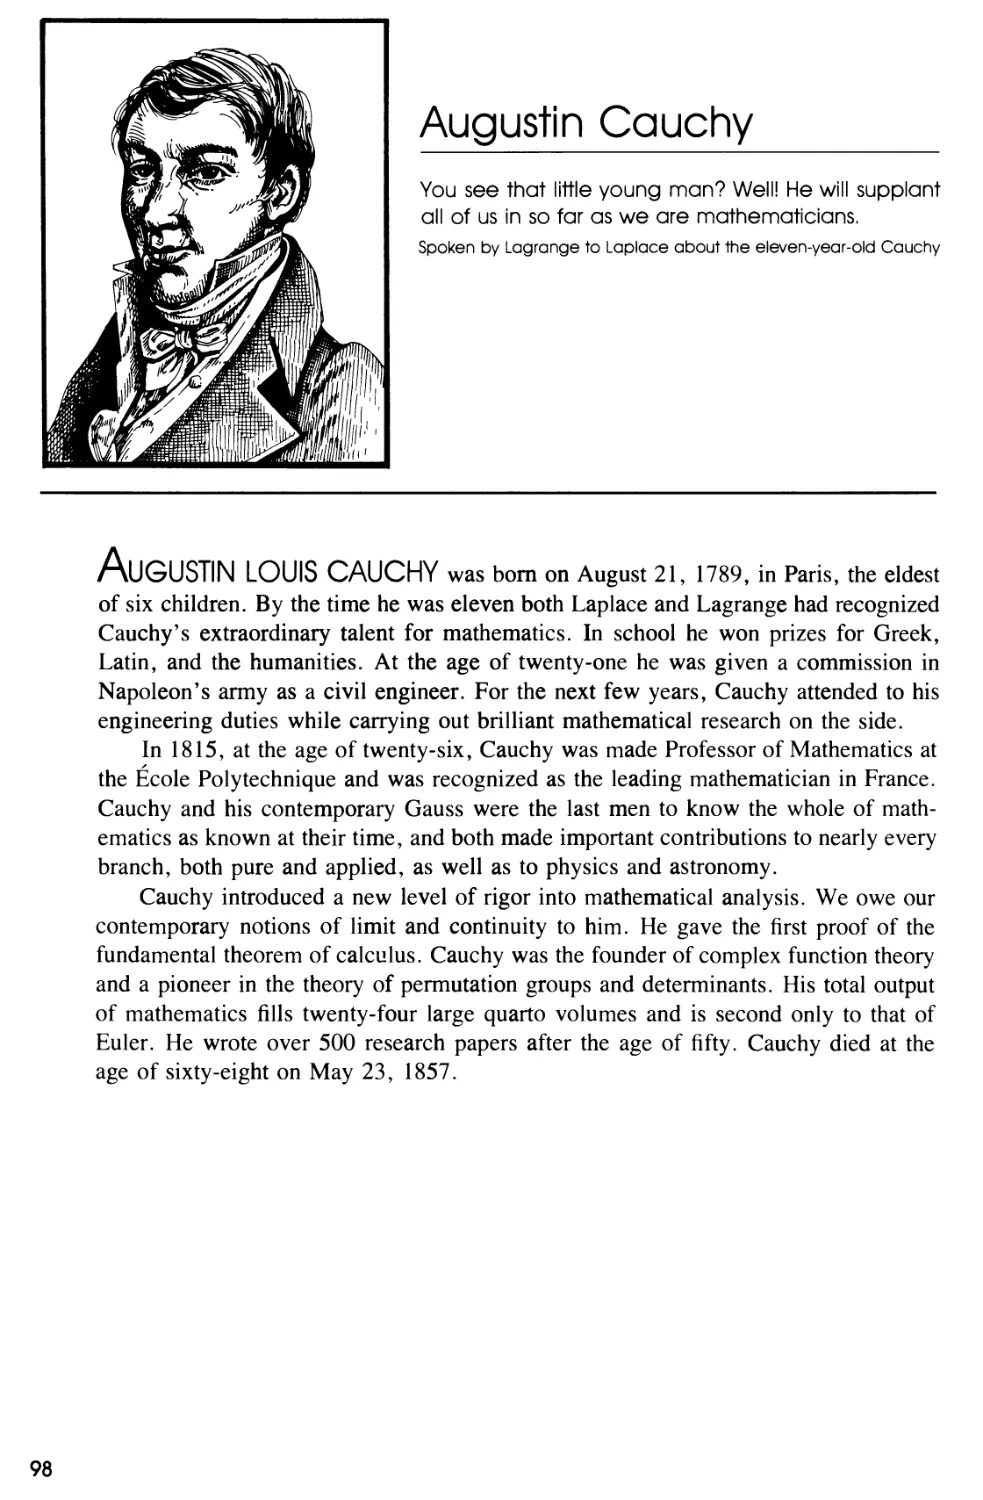 Biography of Augustin Cauchy